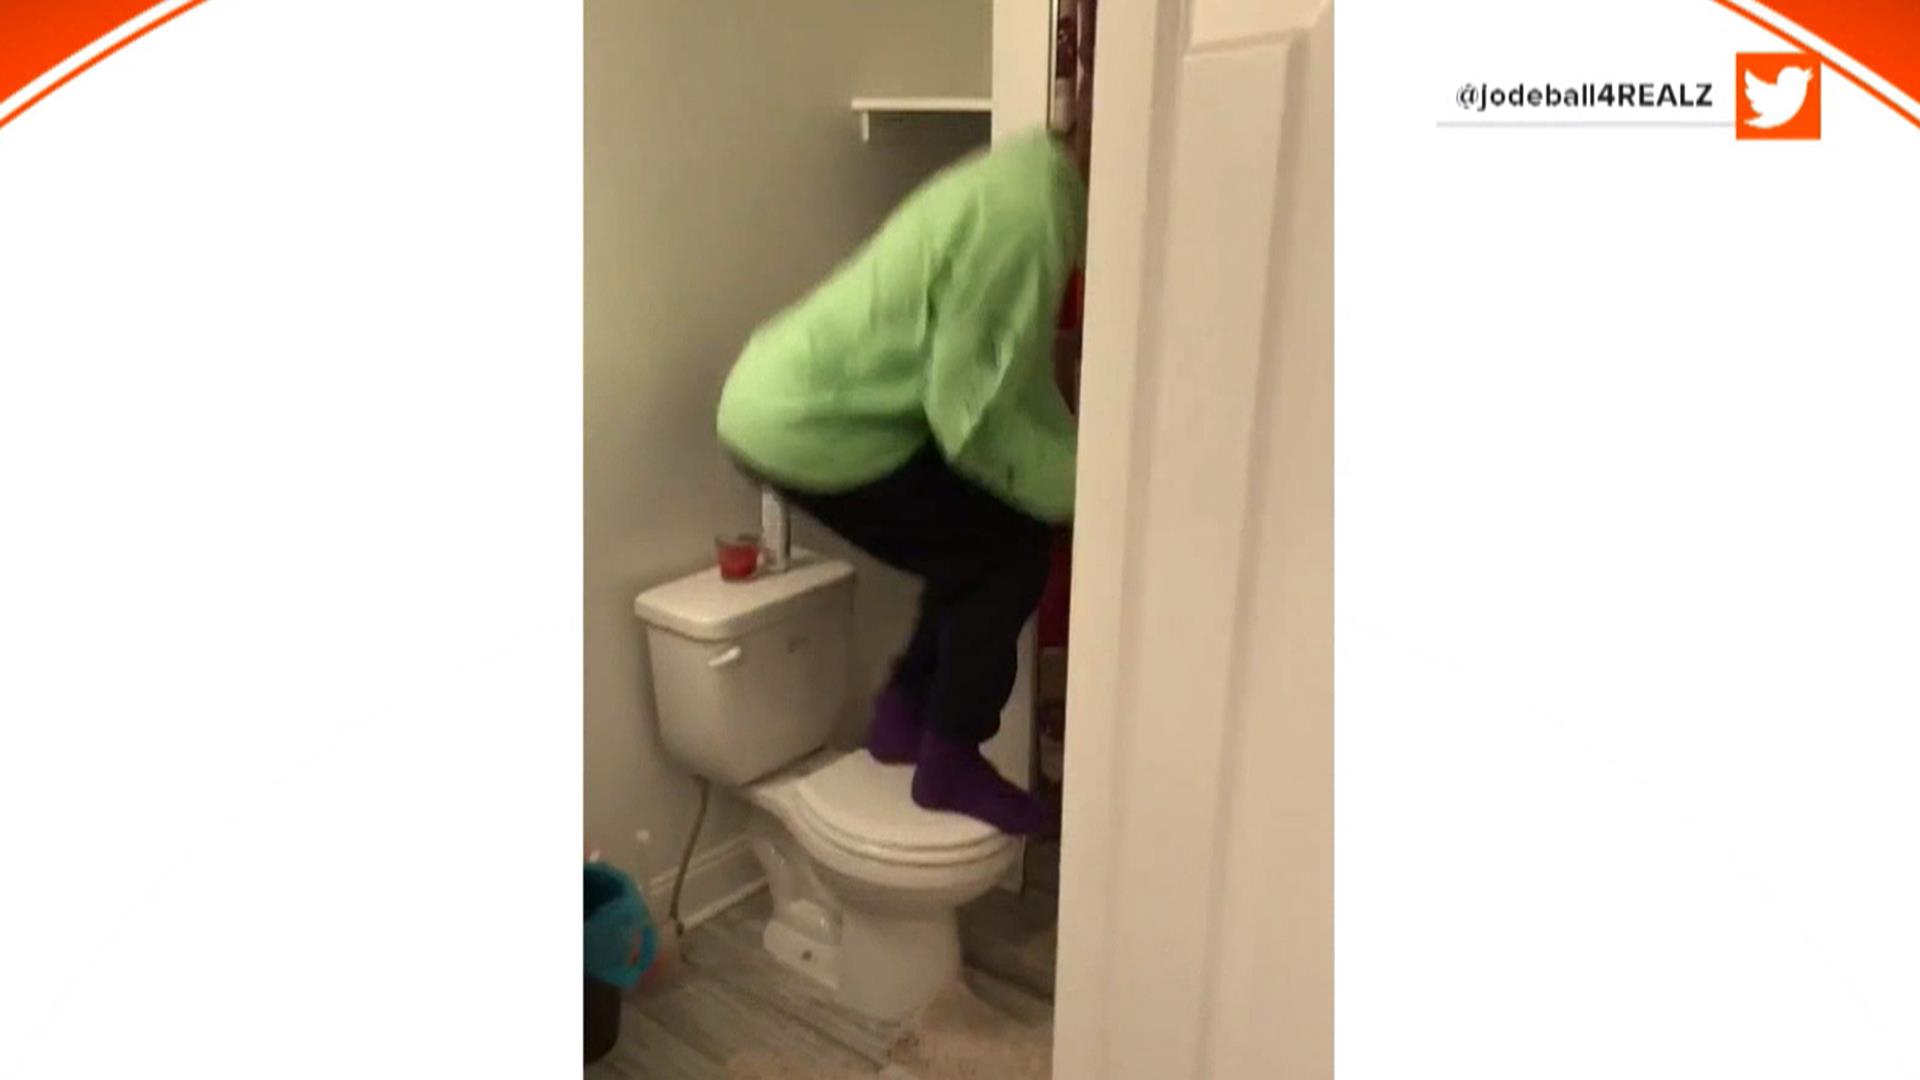 Video of roommates kicking out a rat goes viral